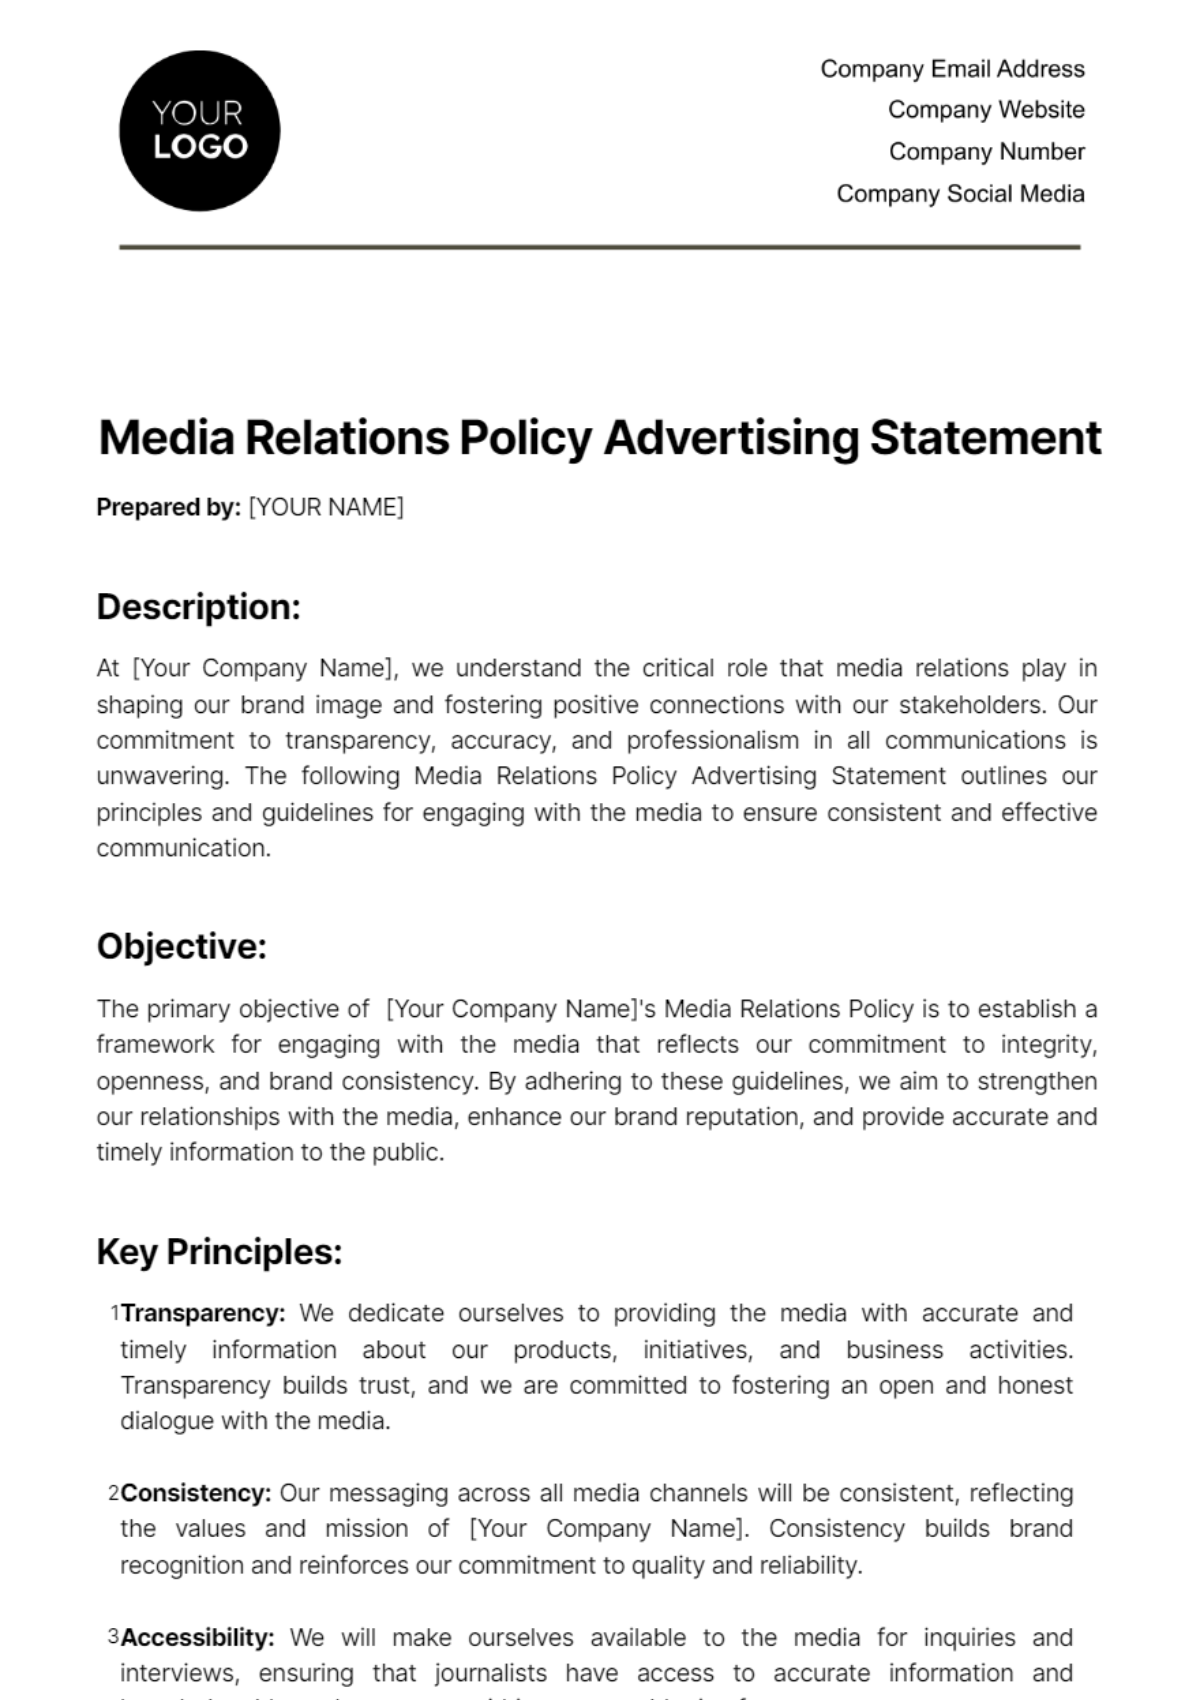 Free Media Relations Policy Advertising Statement Template